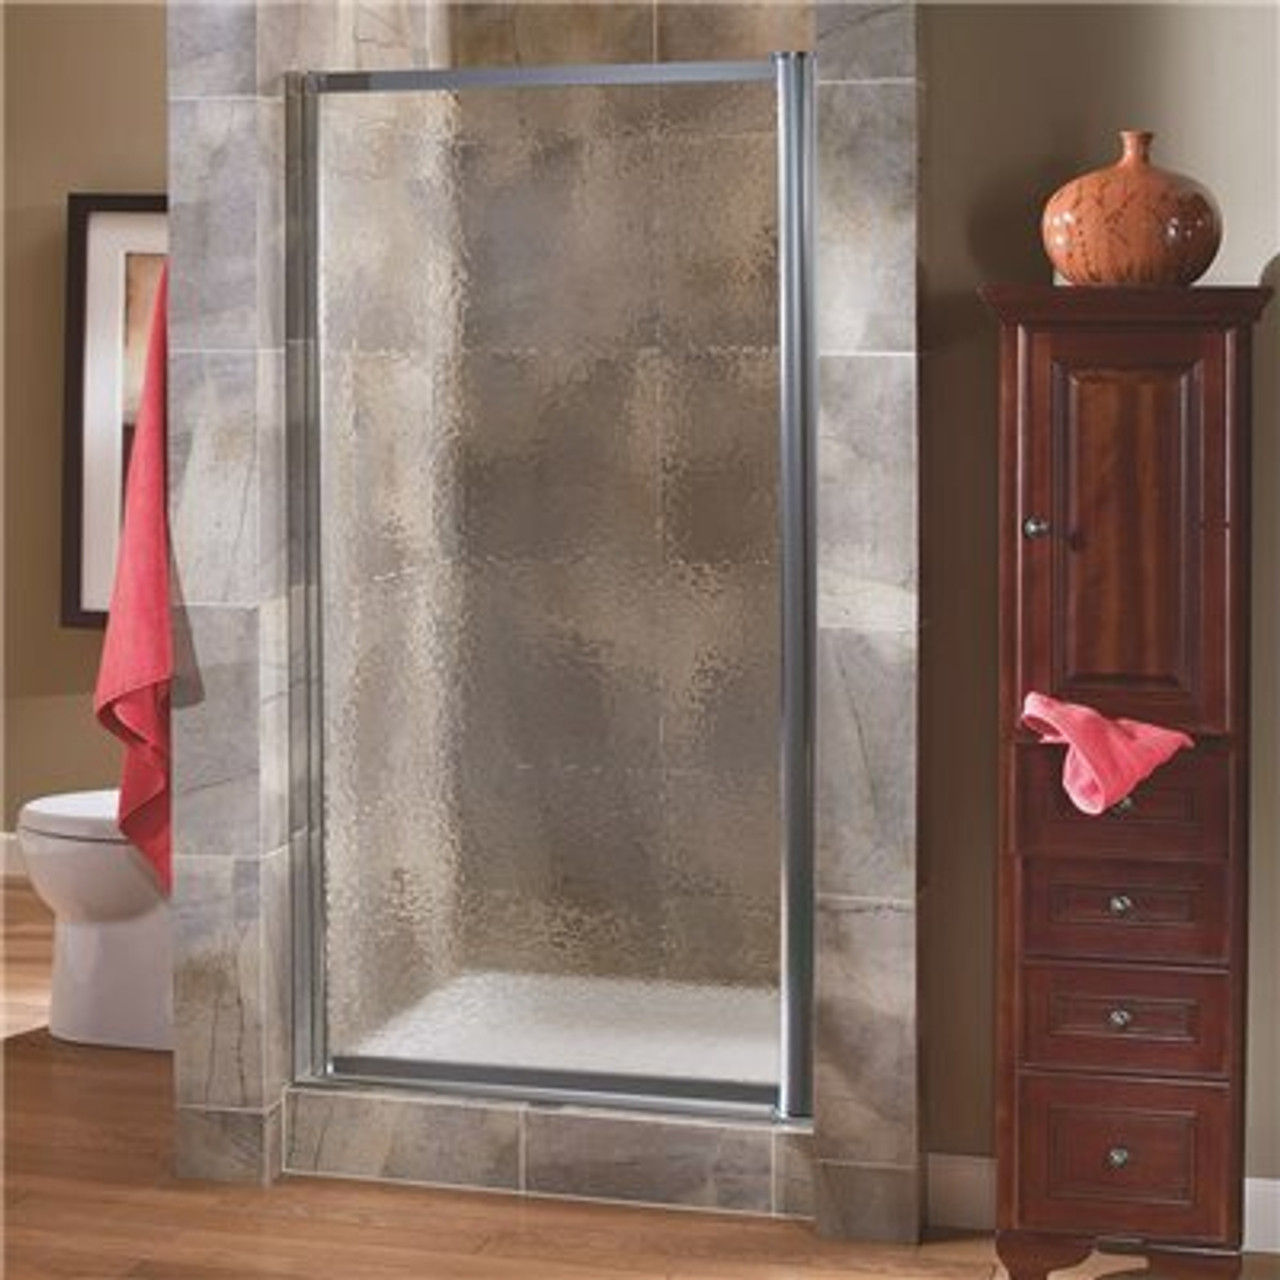 Foremost Tides 27 In. To 29 In. X 65 In. Framed Pivot Shower Door In Silver With Obscure Glass With Handle